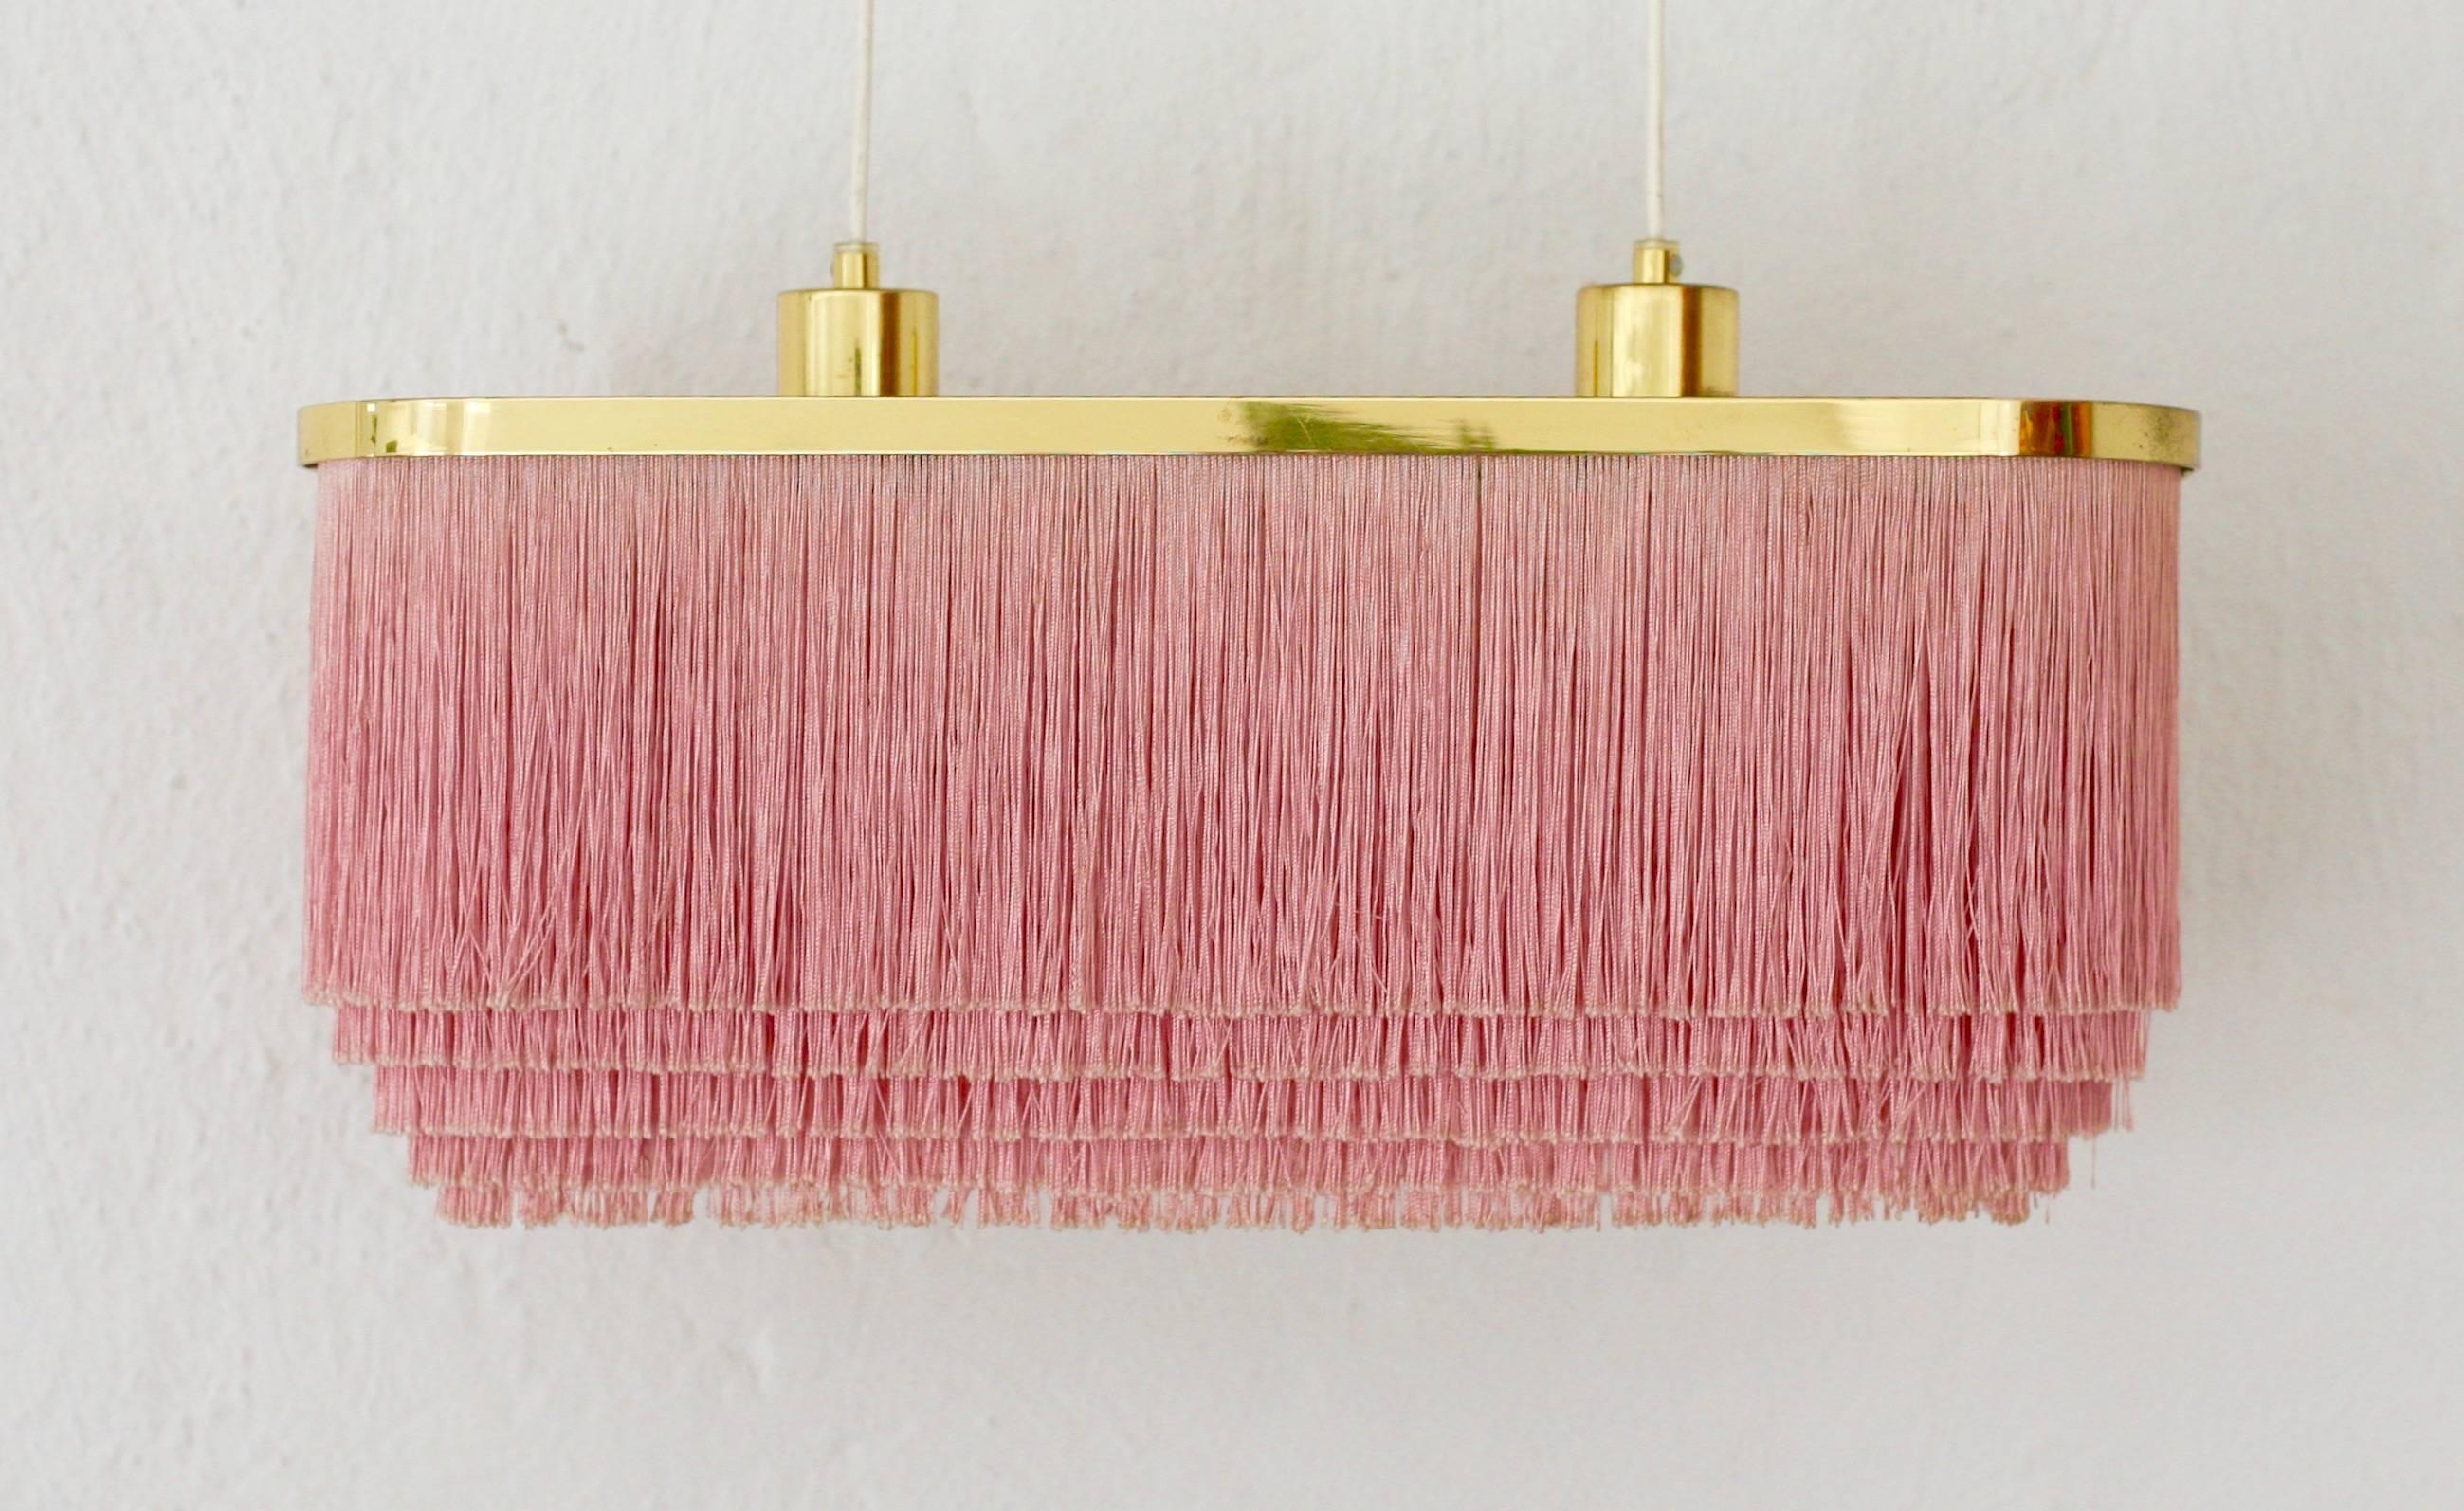 A rare double pink silk fringe lamp by Swedish designer Hans Agne Jakobsson. Model T 607. Great original condition with all parts remaining including ceiling CAP and lock screw. Measures given is for lamp only since electrical cord can be adjusted.